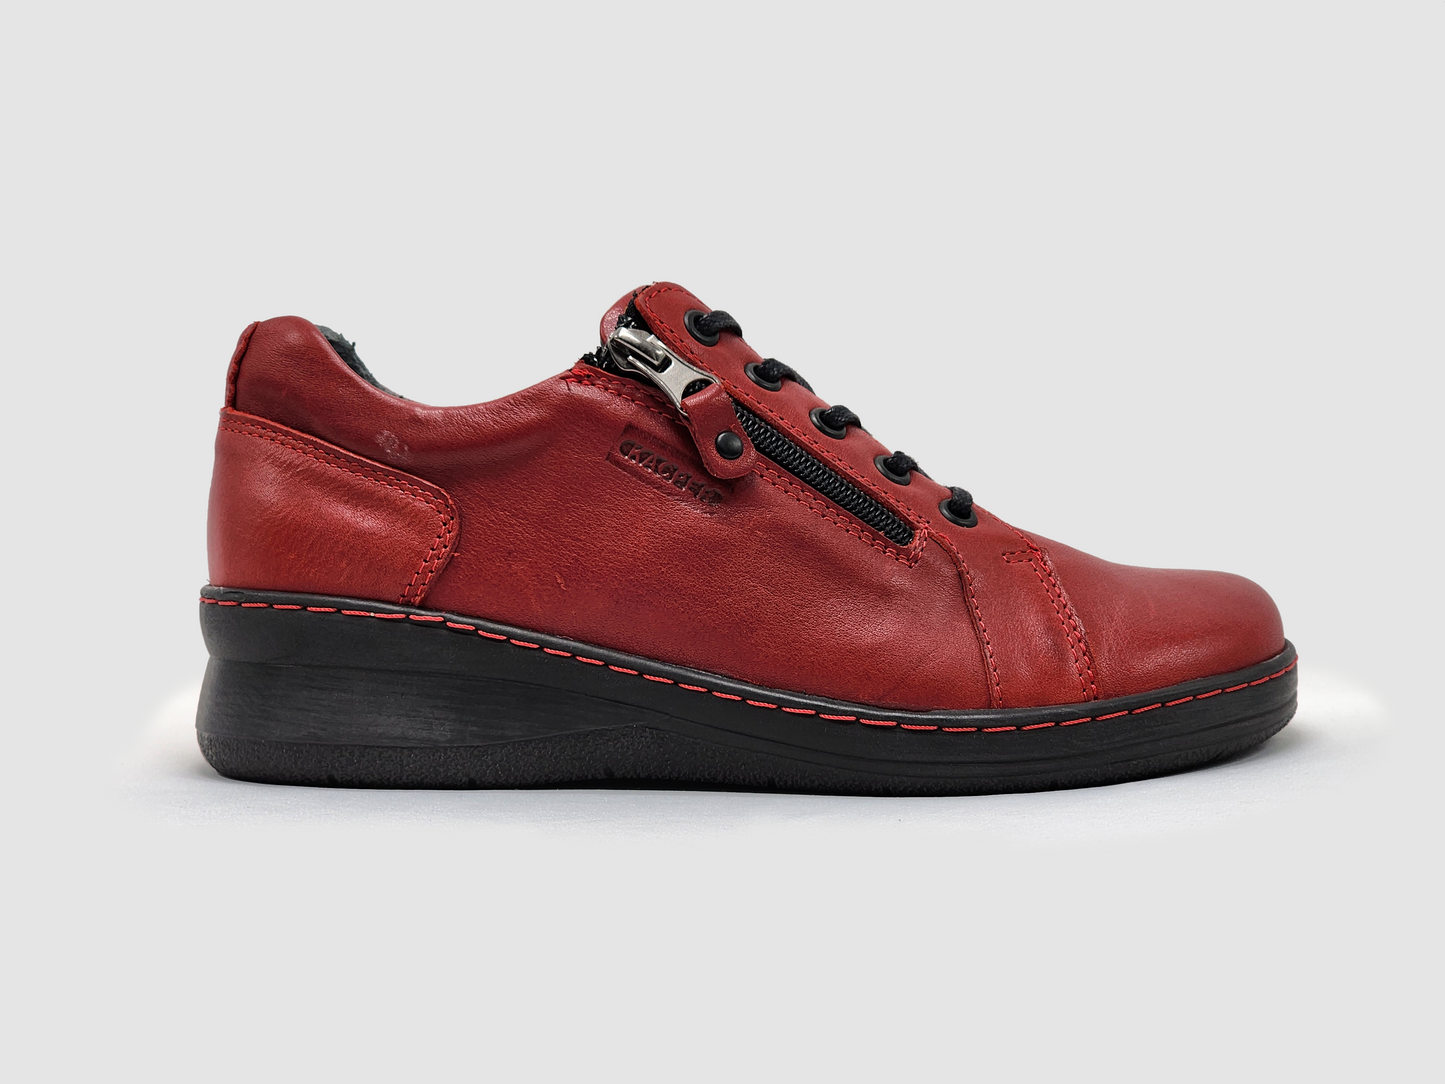 Women's Dr Wellness Zip-Up Leather Shoes - Red - Kacper Global Shoes 